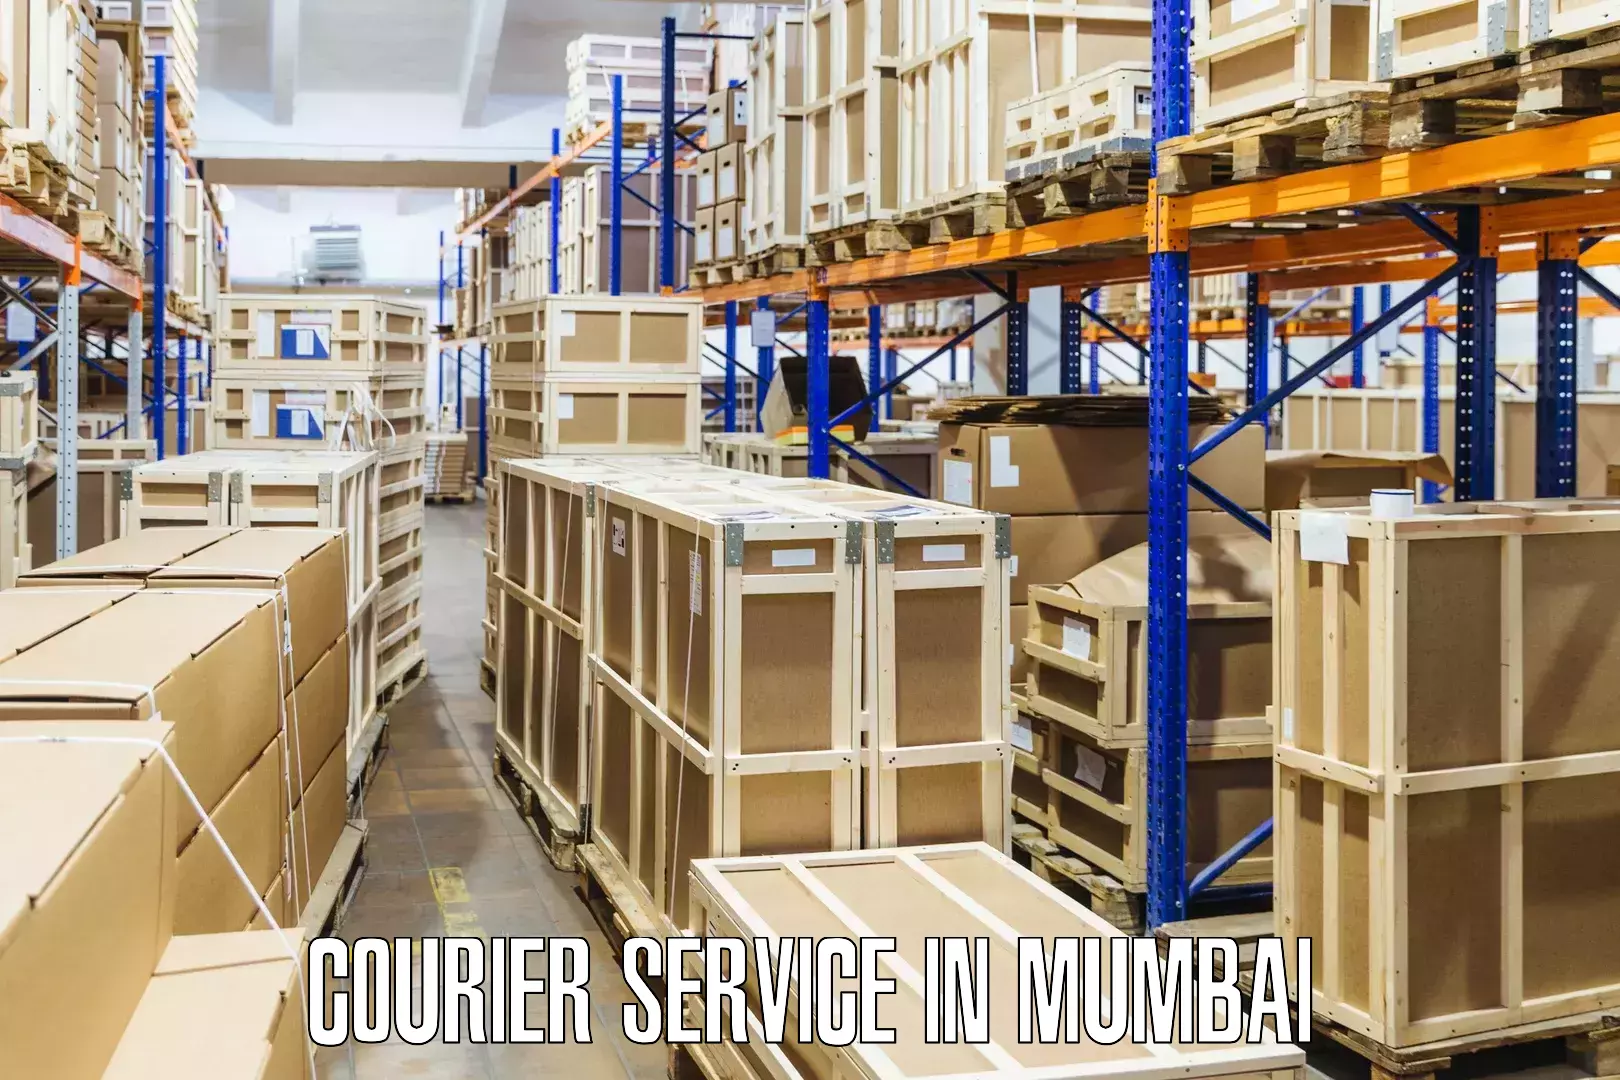 Personal parcel delivery in Mumbai